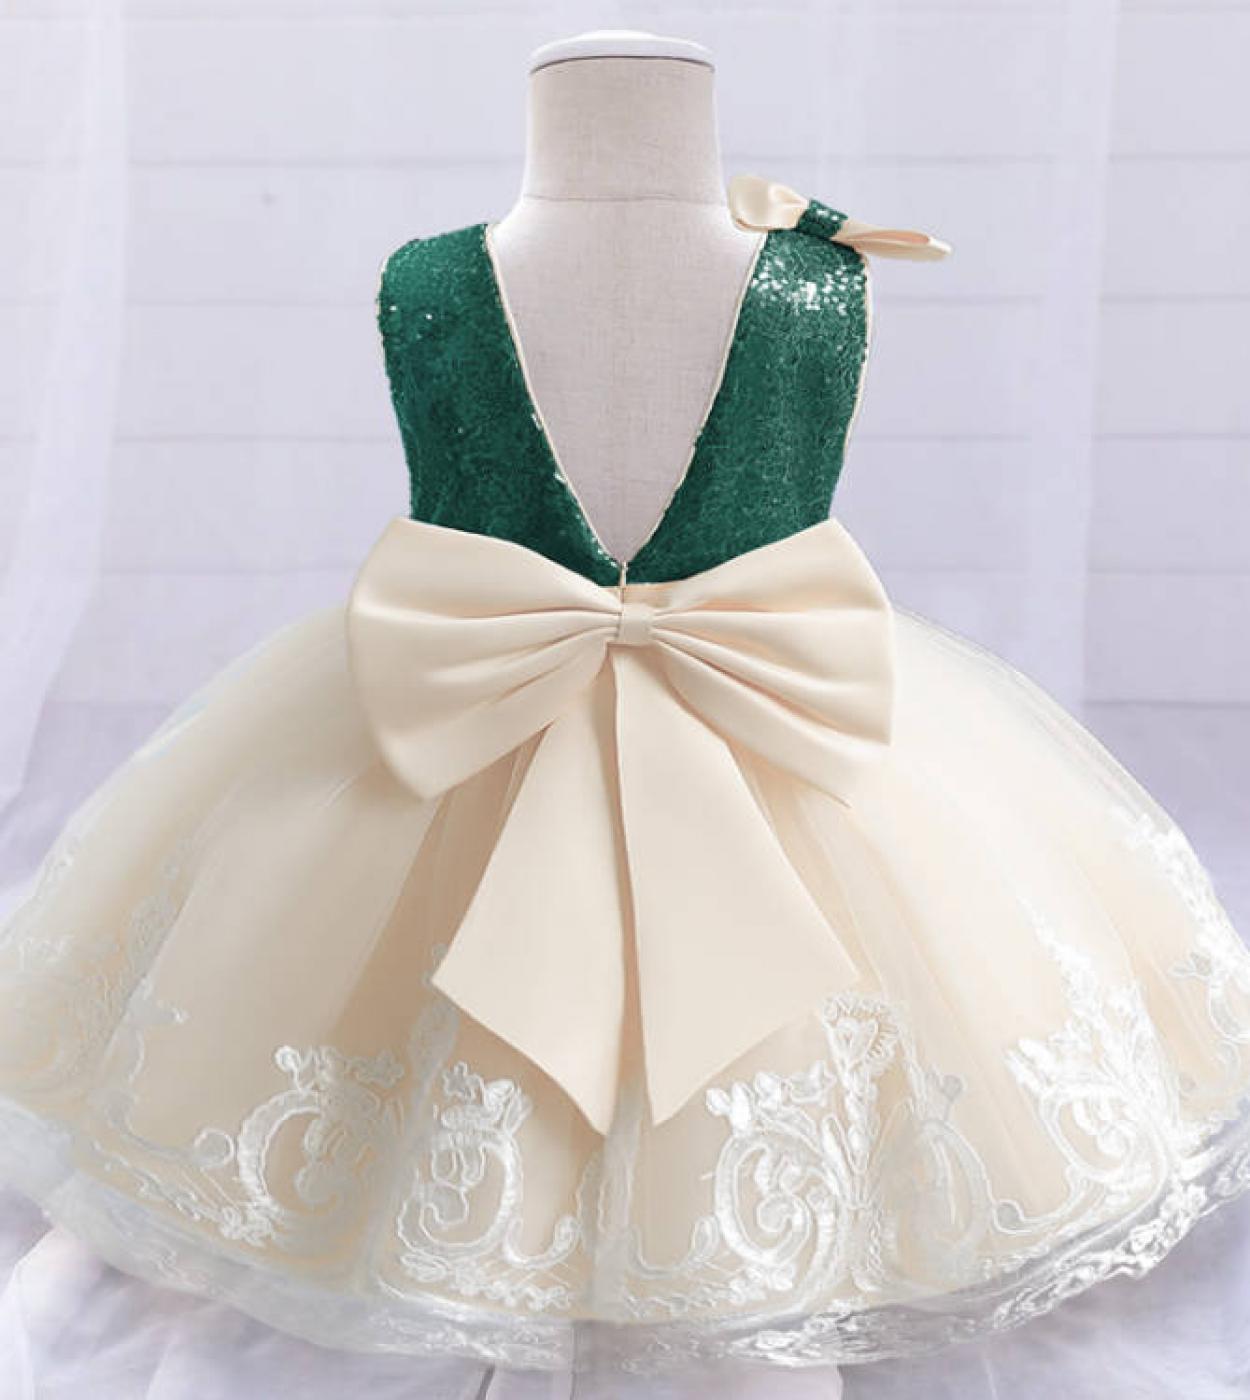 1st Birthday Party Baby Girls Clothes 2022 New Flower Lace Wedding Gown 15 Year Christmas Princess Sequins Sleeveless Co